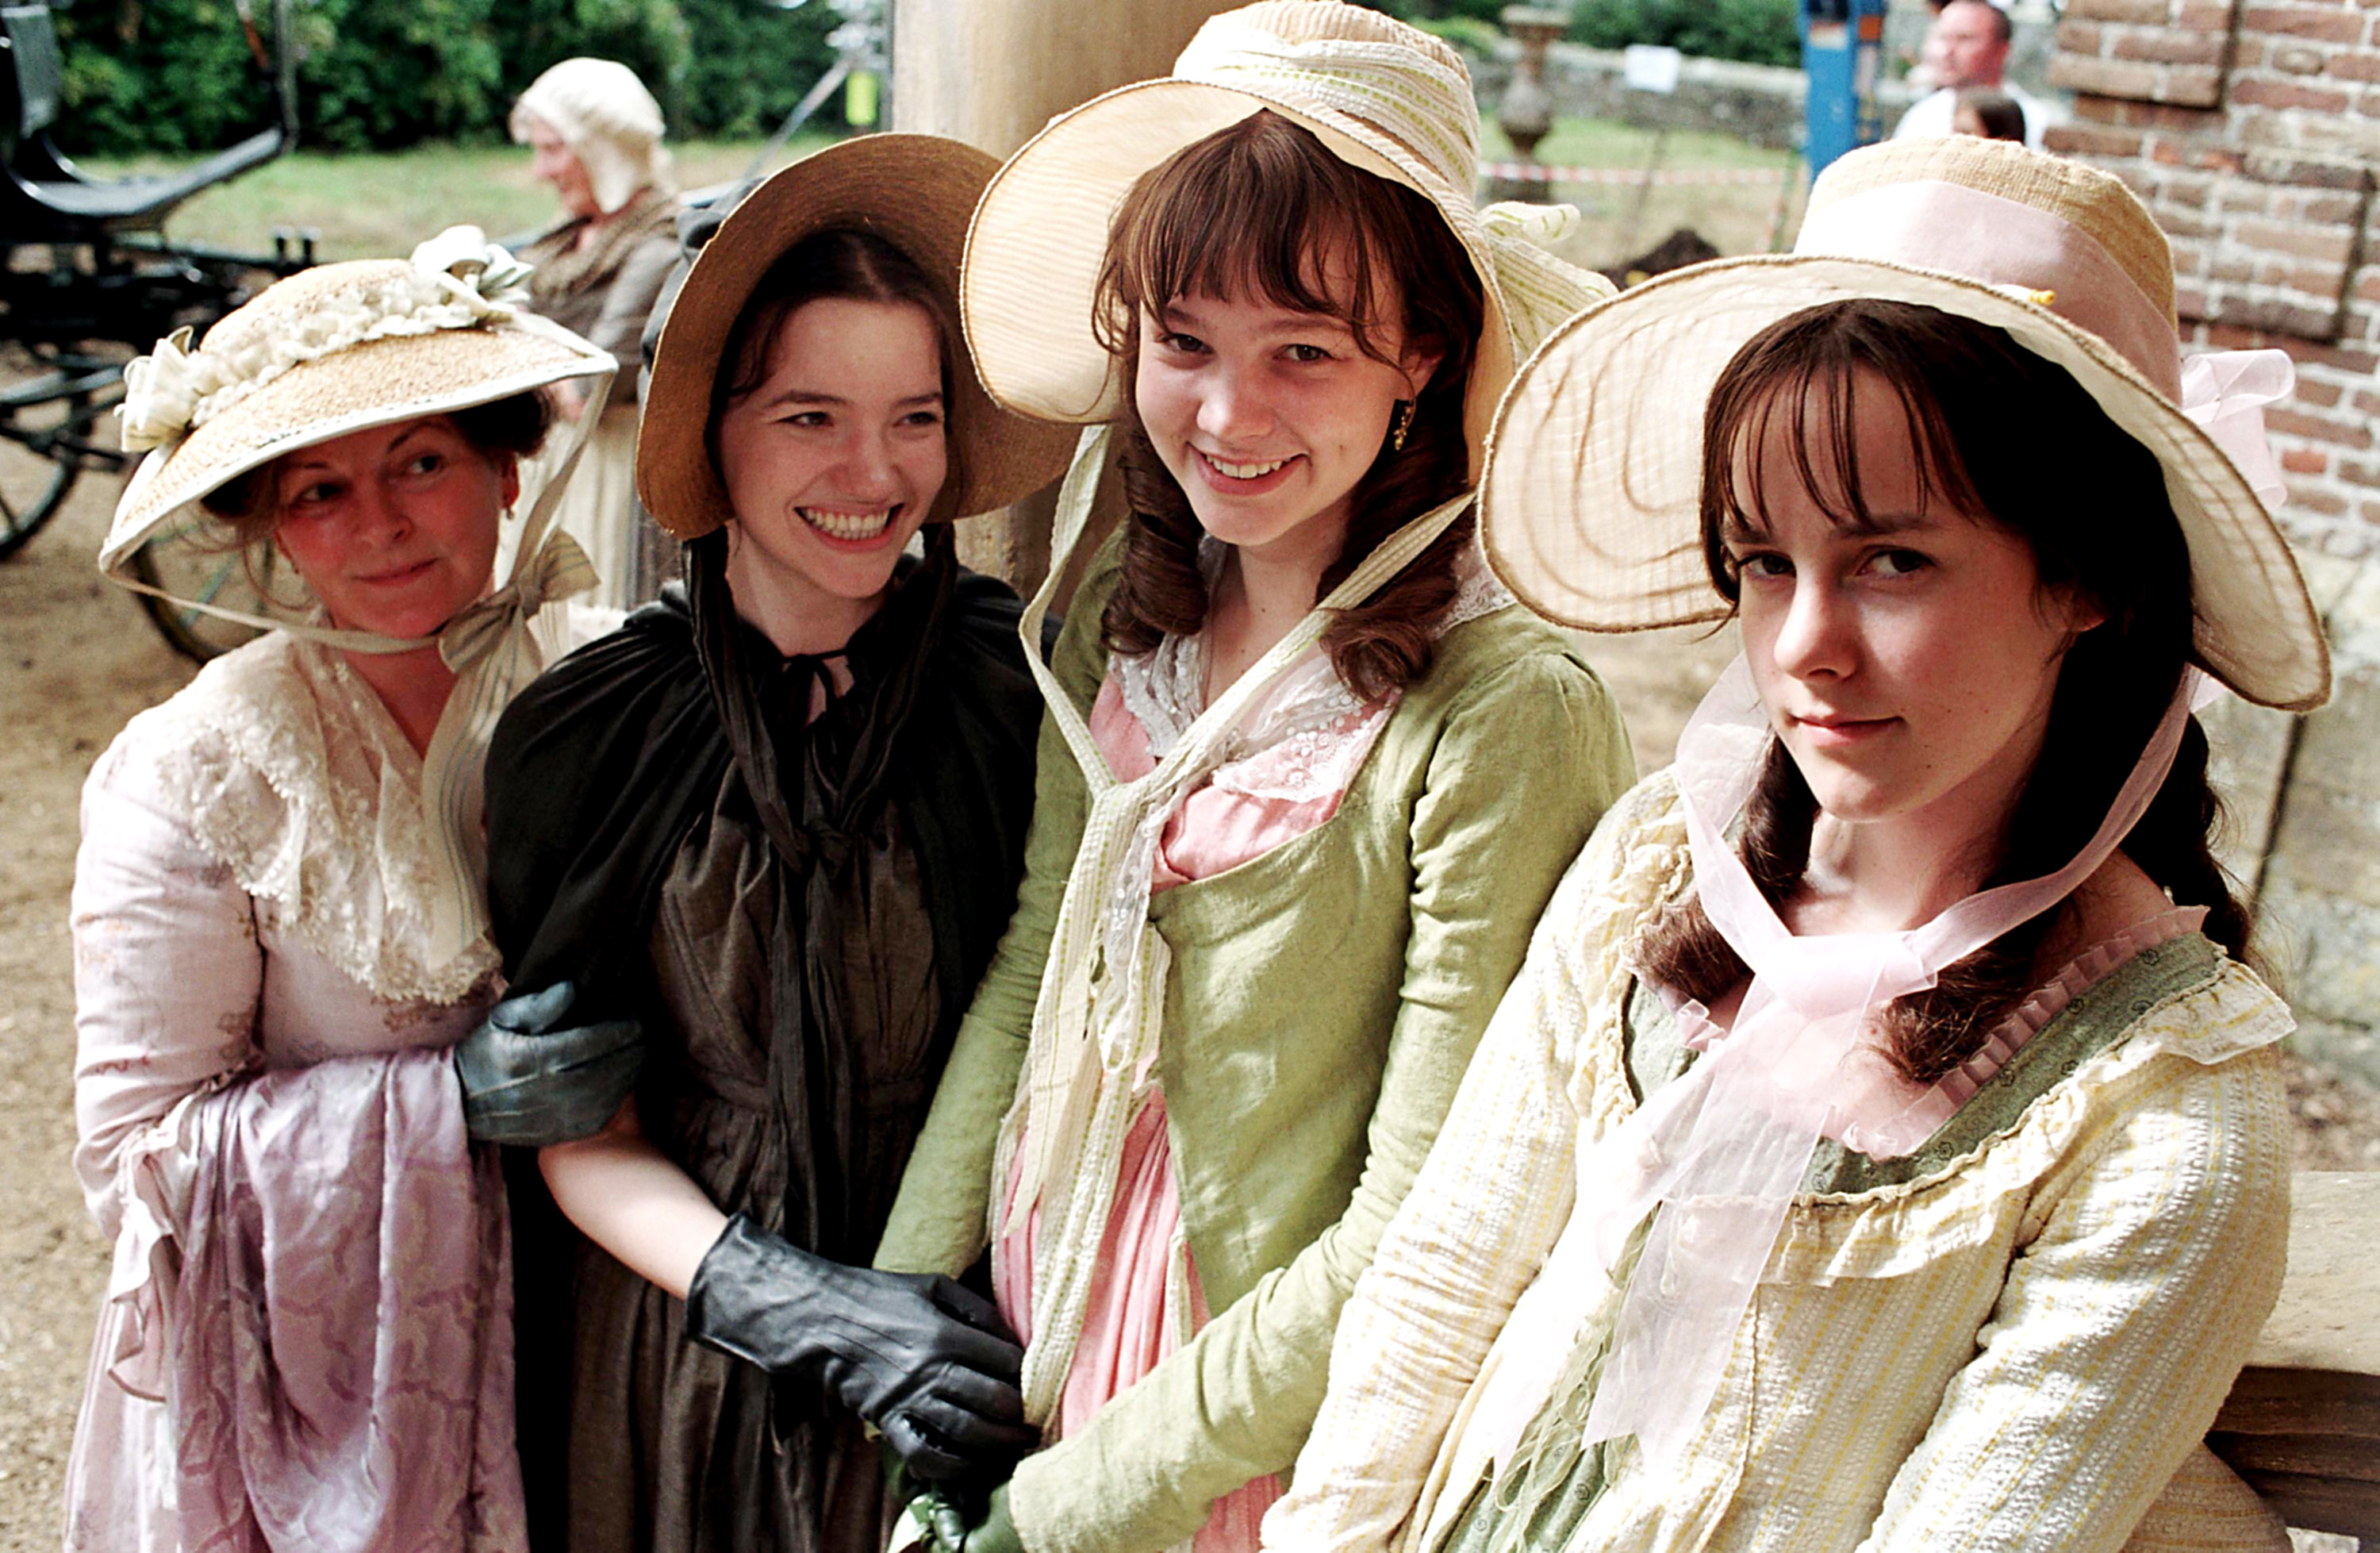 Close-up of Carey with other young women in period costumes and bonnets